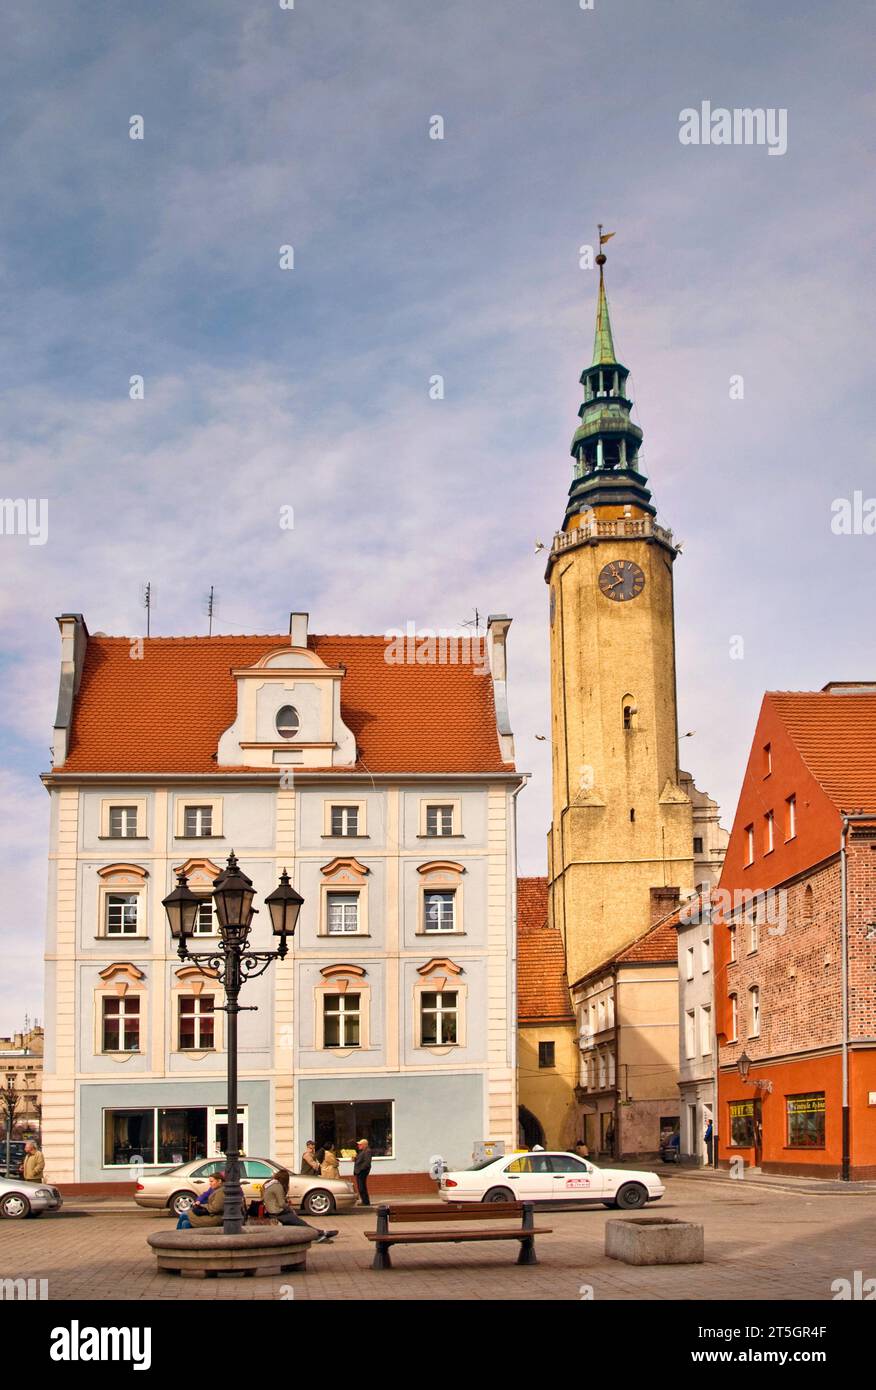 Rynek (Market Square) and tower of Town Hall in Brzeg, Opolskie, Poland Stock Photo